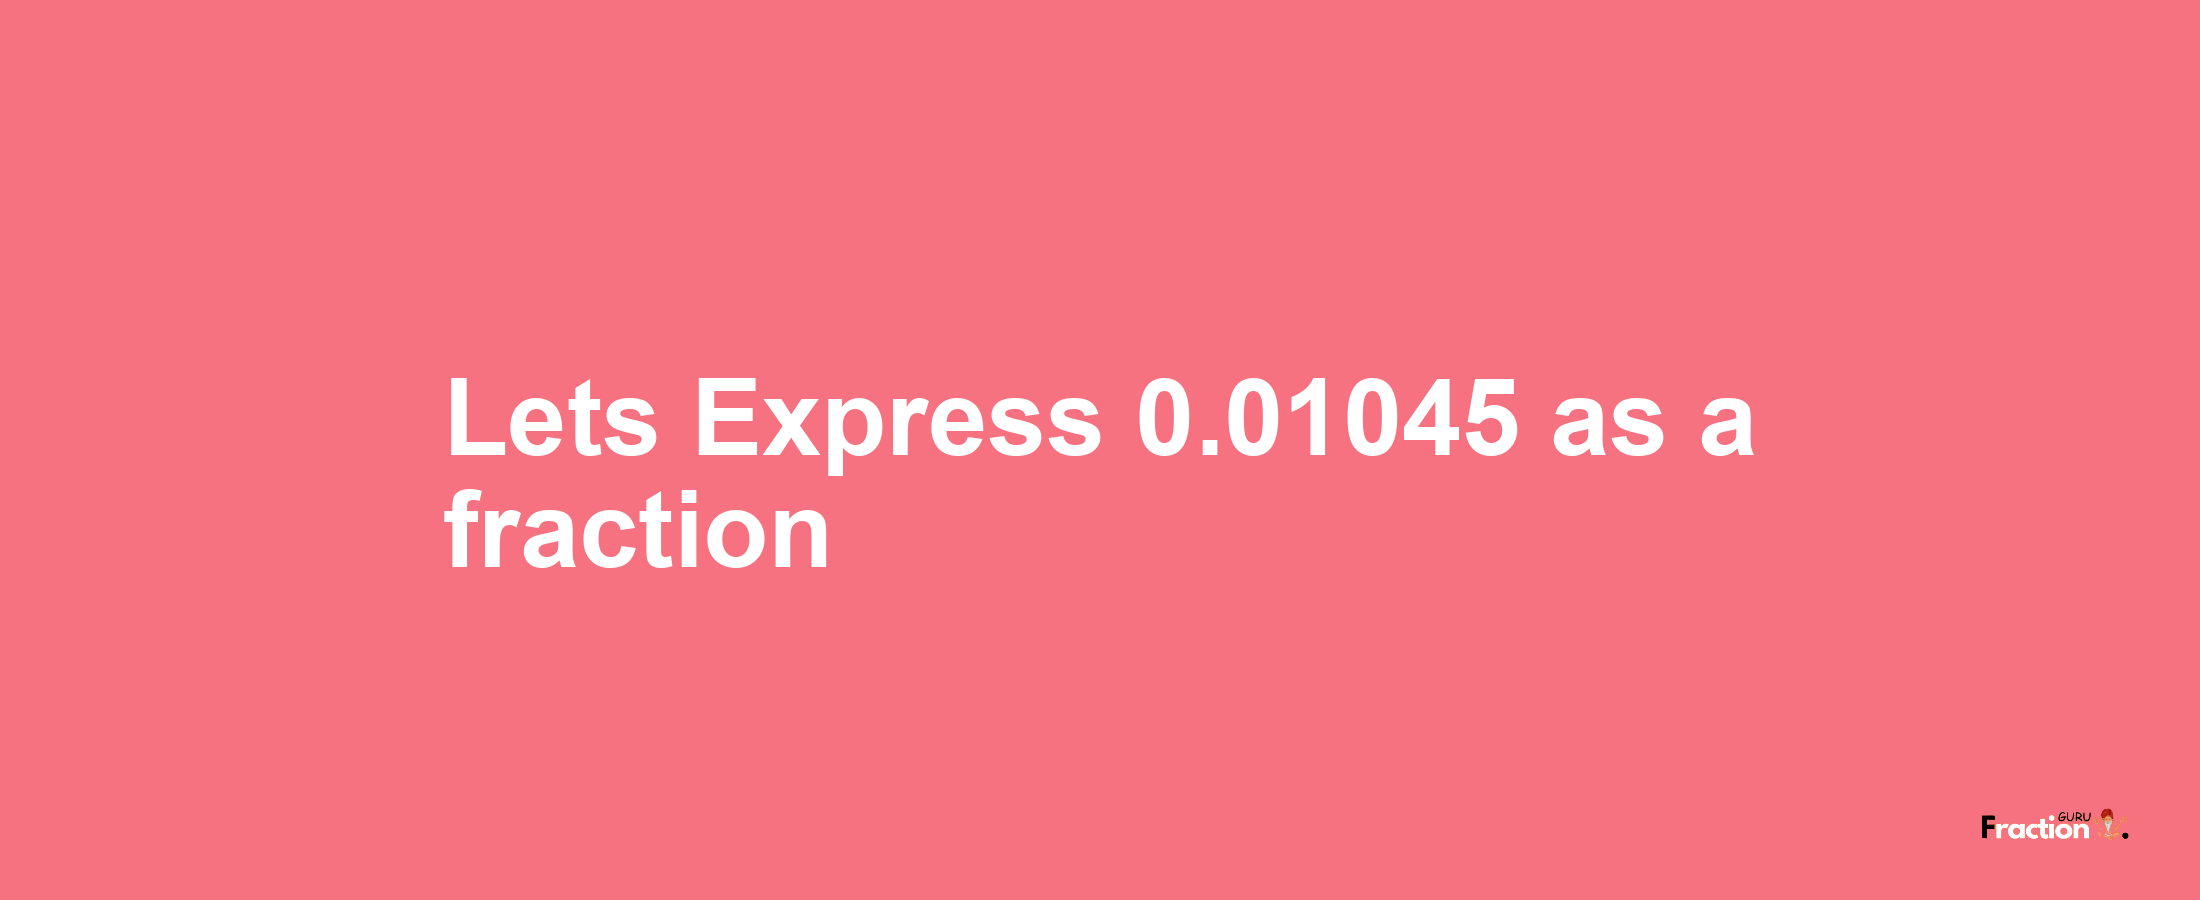 Lets Express 0.01045 as afraction